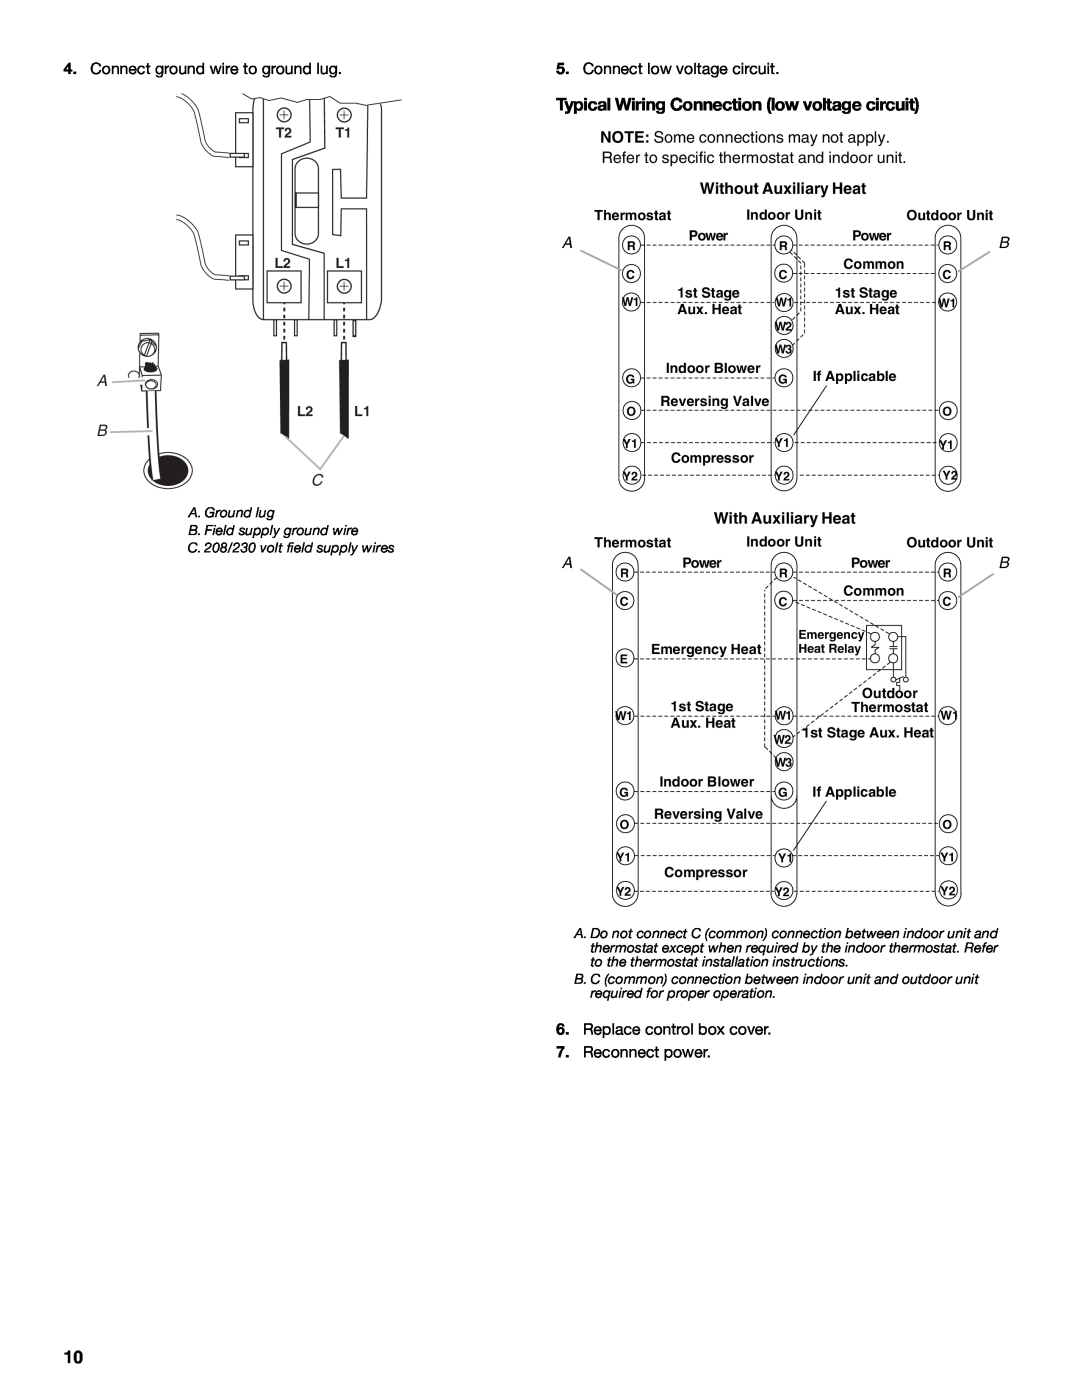 Whirlpool W4GH6 Typical Wiring Connection low voltage circuit, Without Auxiliary Heat, With Auxiliary Heat 